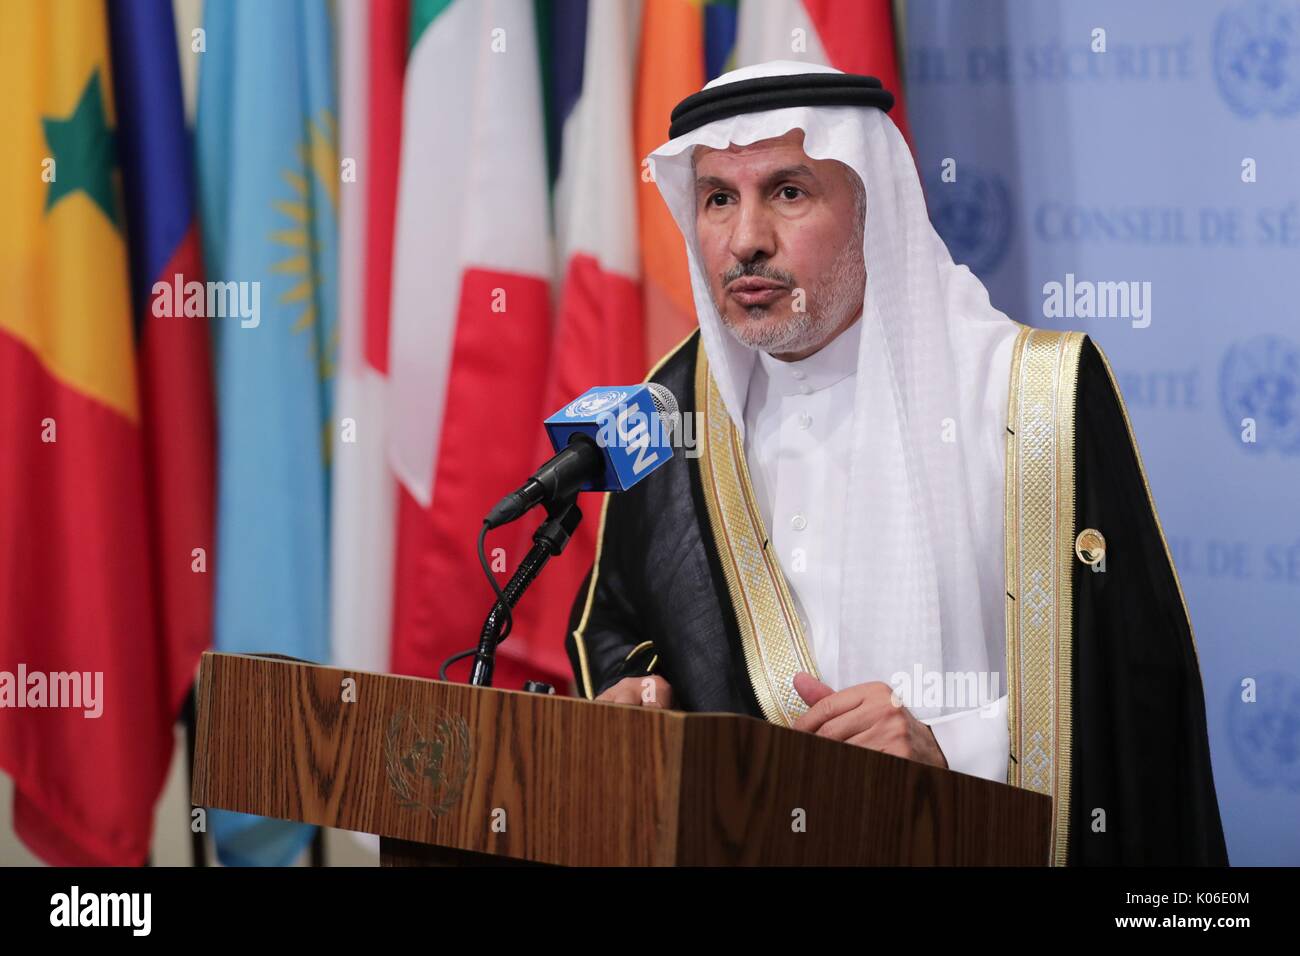 United Nations, New York, USA, August 21 2017 - Abdullah bin Abdulaziz Al Rabeeah, General Supervisor of the King Salman Centre for Relief and Humanitarian Affairs of Saudi Arabia, briefs journalists on the humanitarian situation in Yemen. Joining him in in addressing reporters was Abdallah Yahya A. Al-Mouallimi, Permanent Representative of Saudi Arabia to the UN today at the UN Headquarters in New York City. Photo: Luiz Rampelotto/EuropaNewswire | usage worldwide Stock Photo